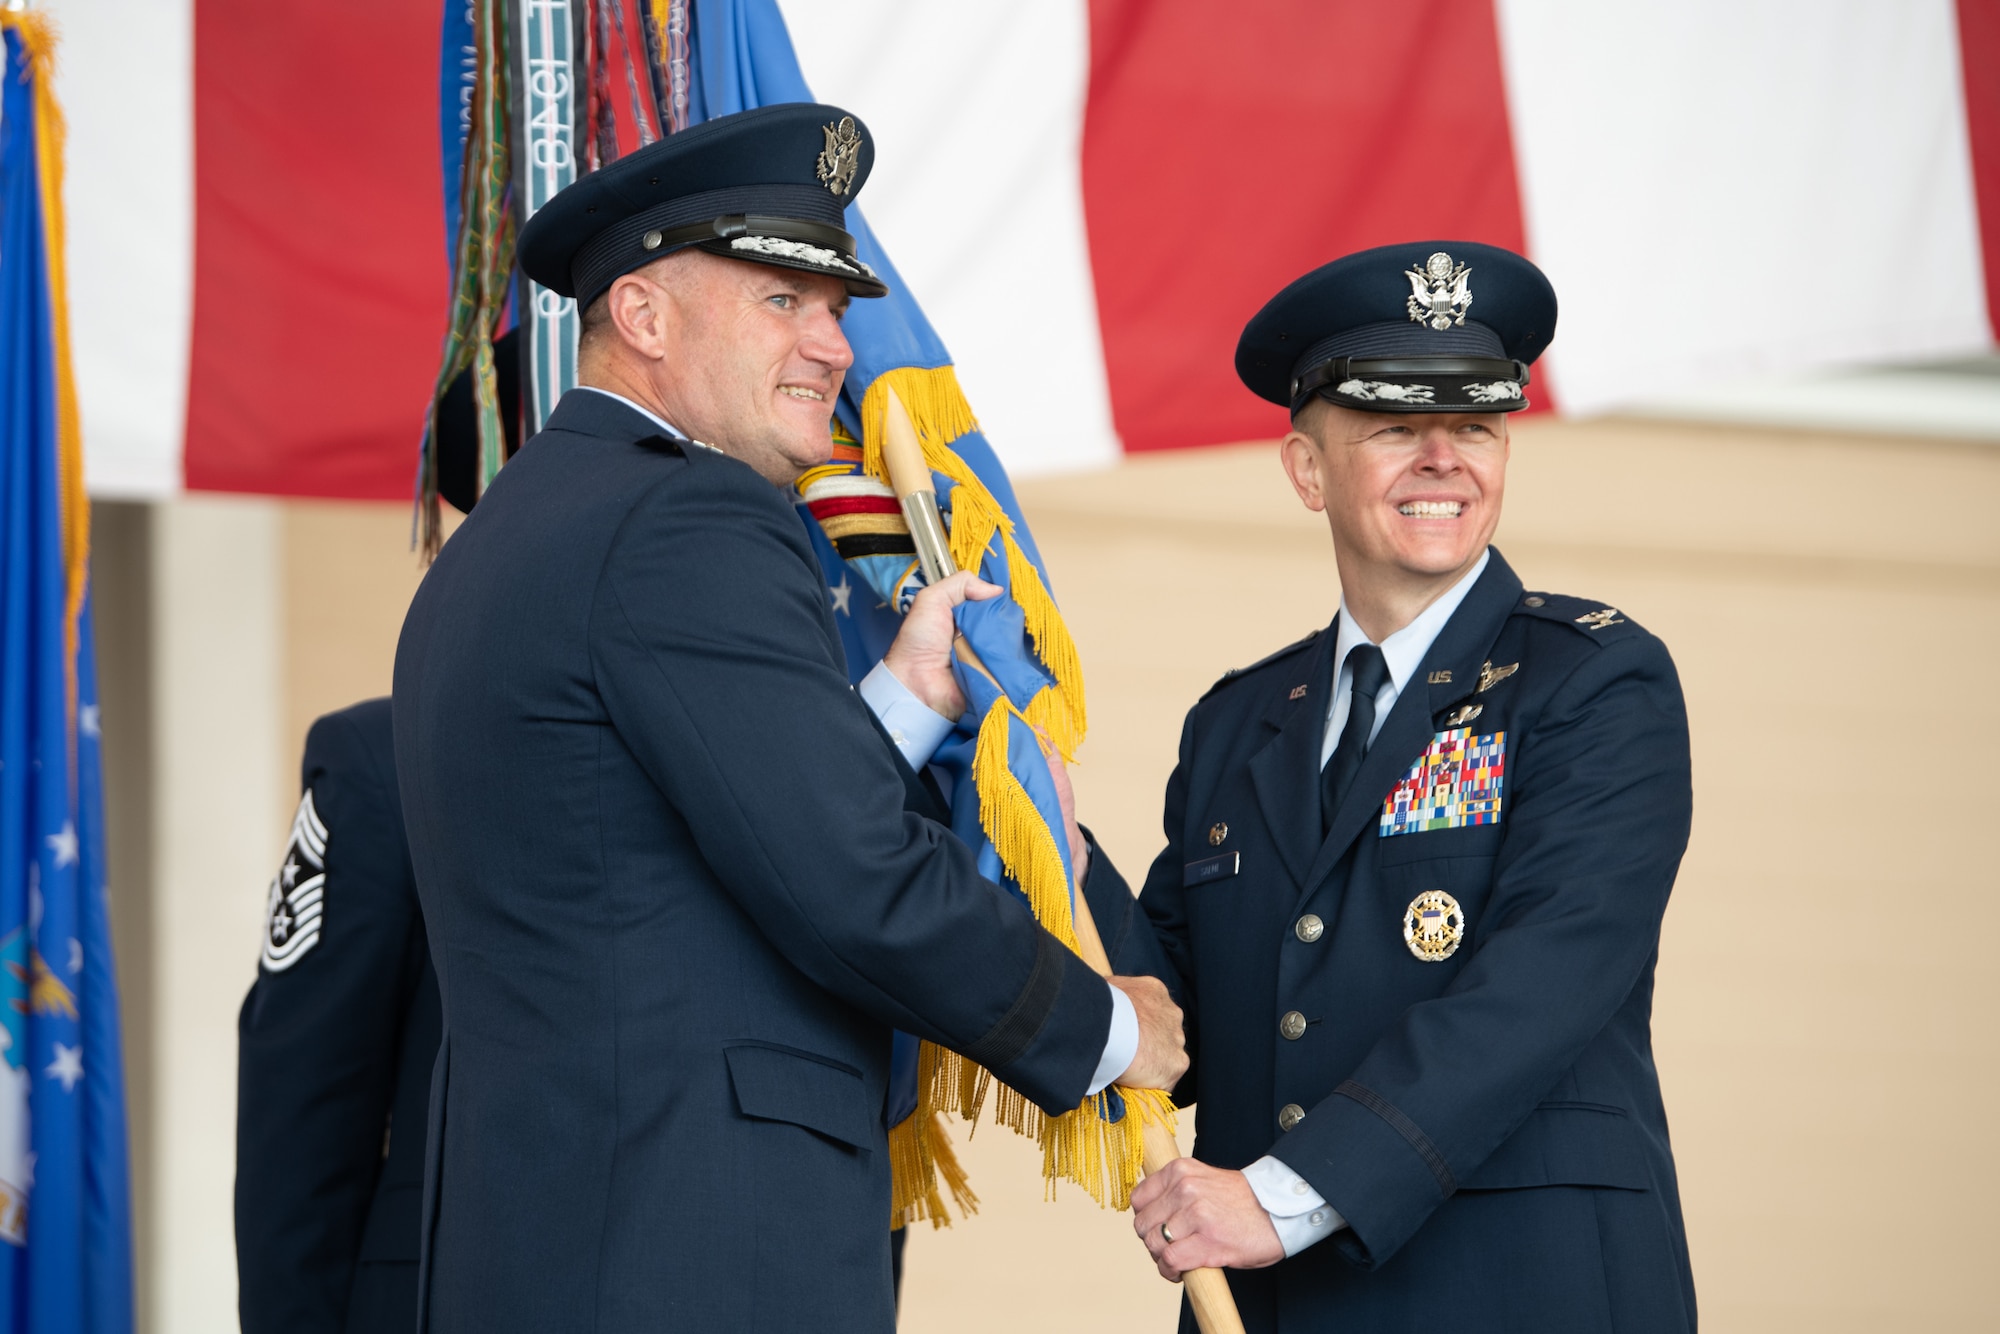 Two higher ranking Airmen hold a flag.